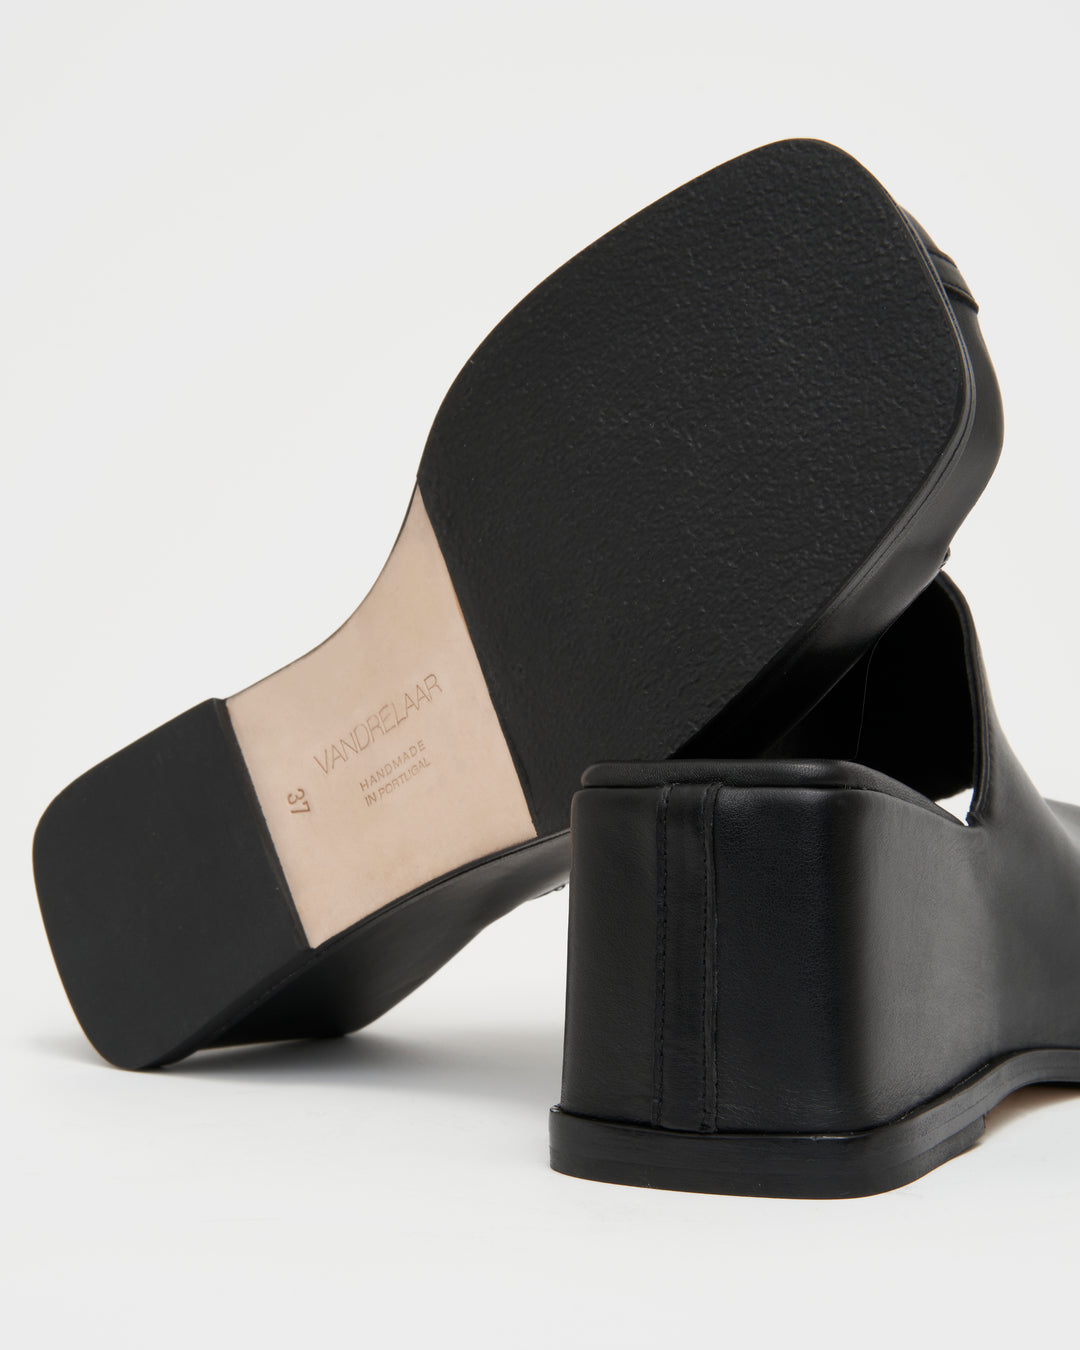 Luca Wedge, Black Leather